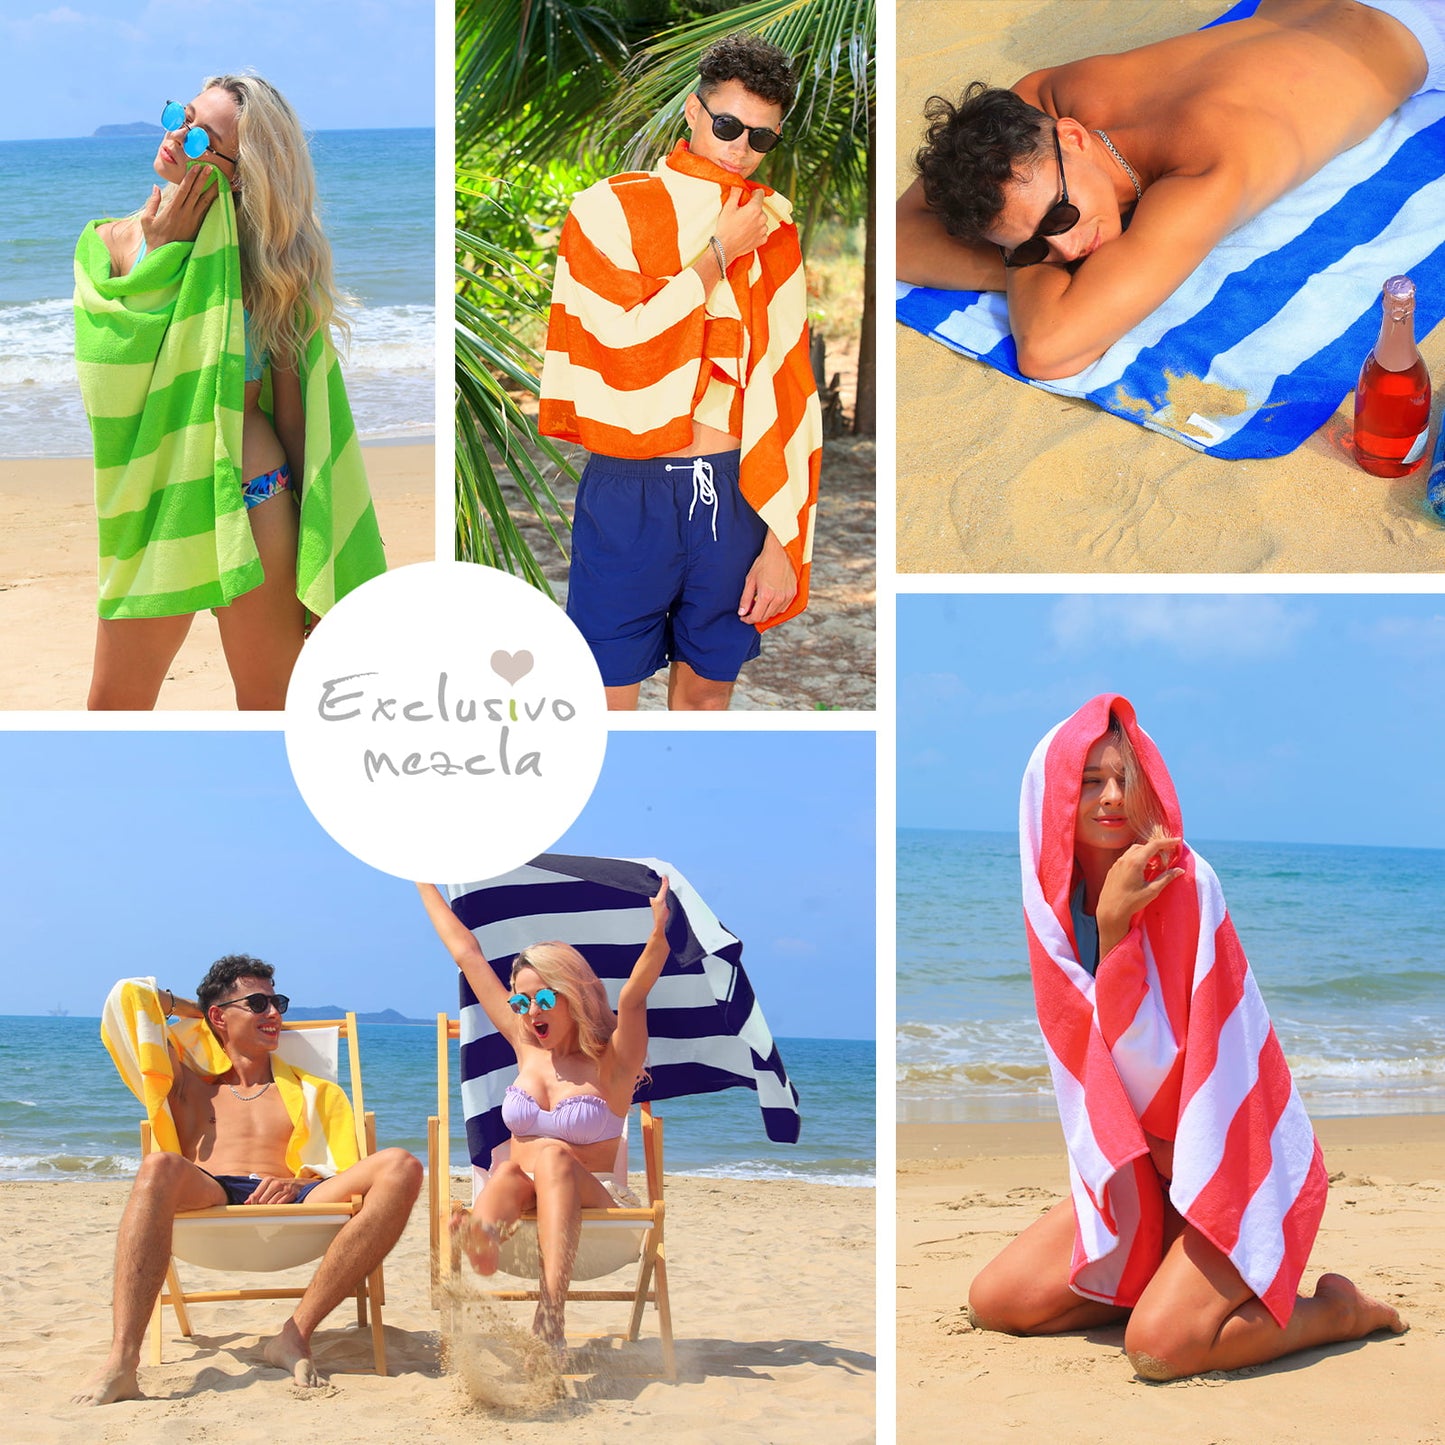 Exclusivo Mezcla 4-Pack Microfiber Cabana Striped Large Beach/Pool/Bath Towel for Adults (Light Green, 30" x 60") - Soft, Quick Dry, Lightweight and Absorbent